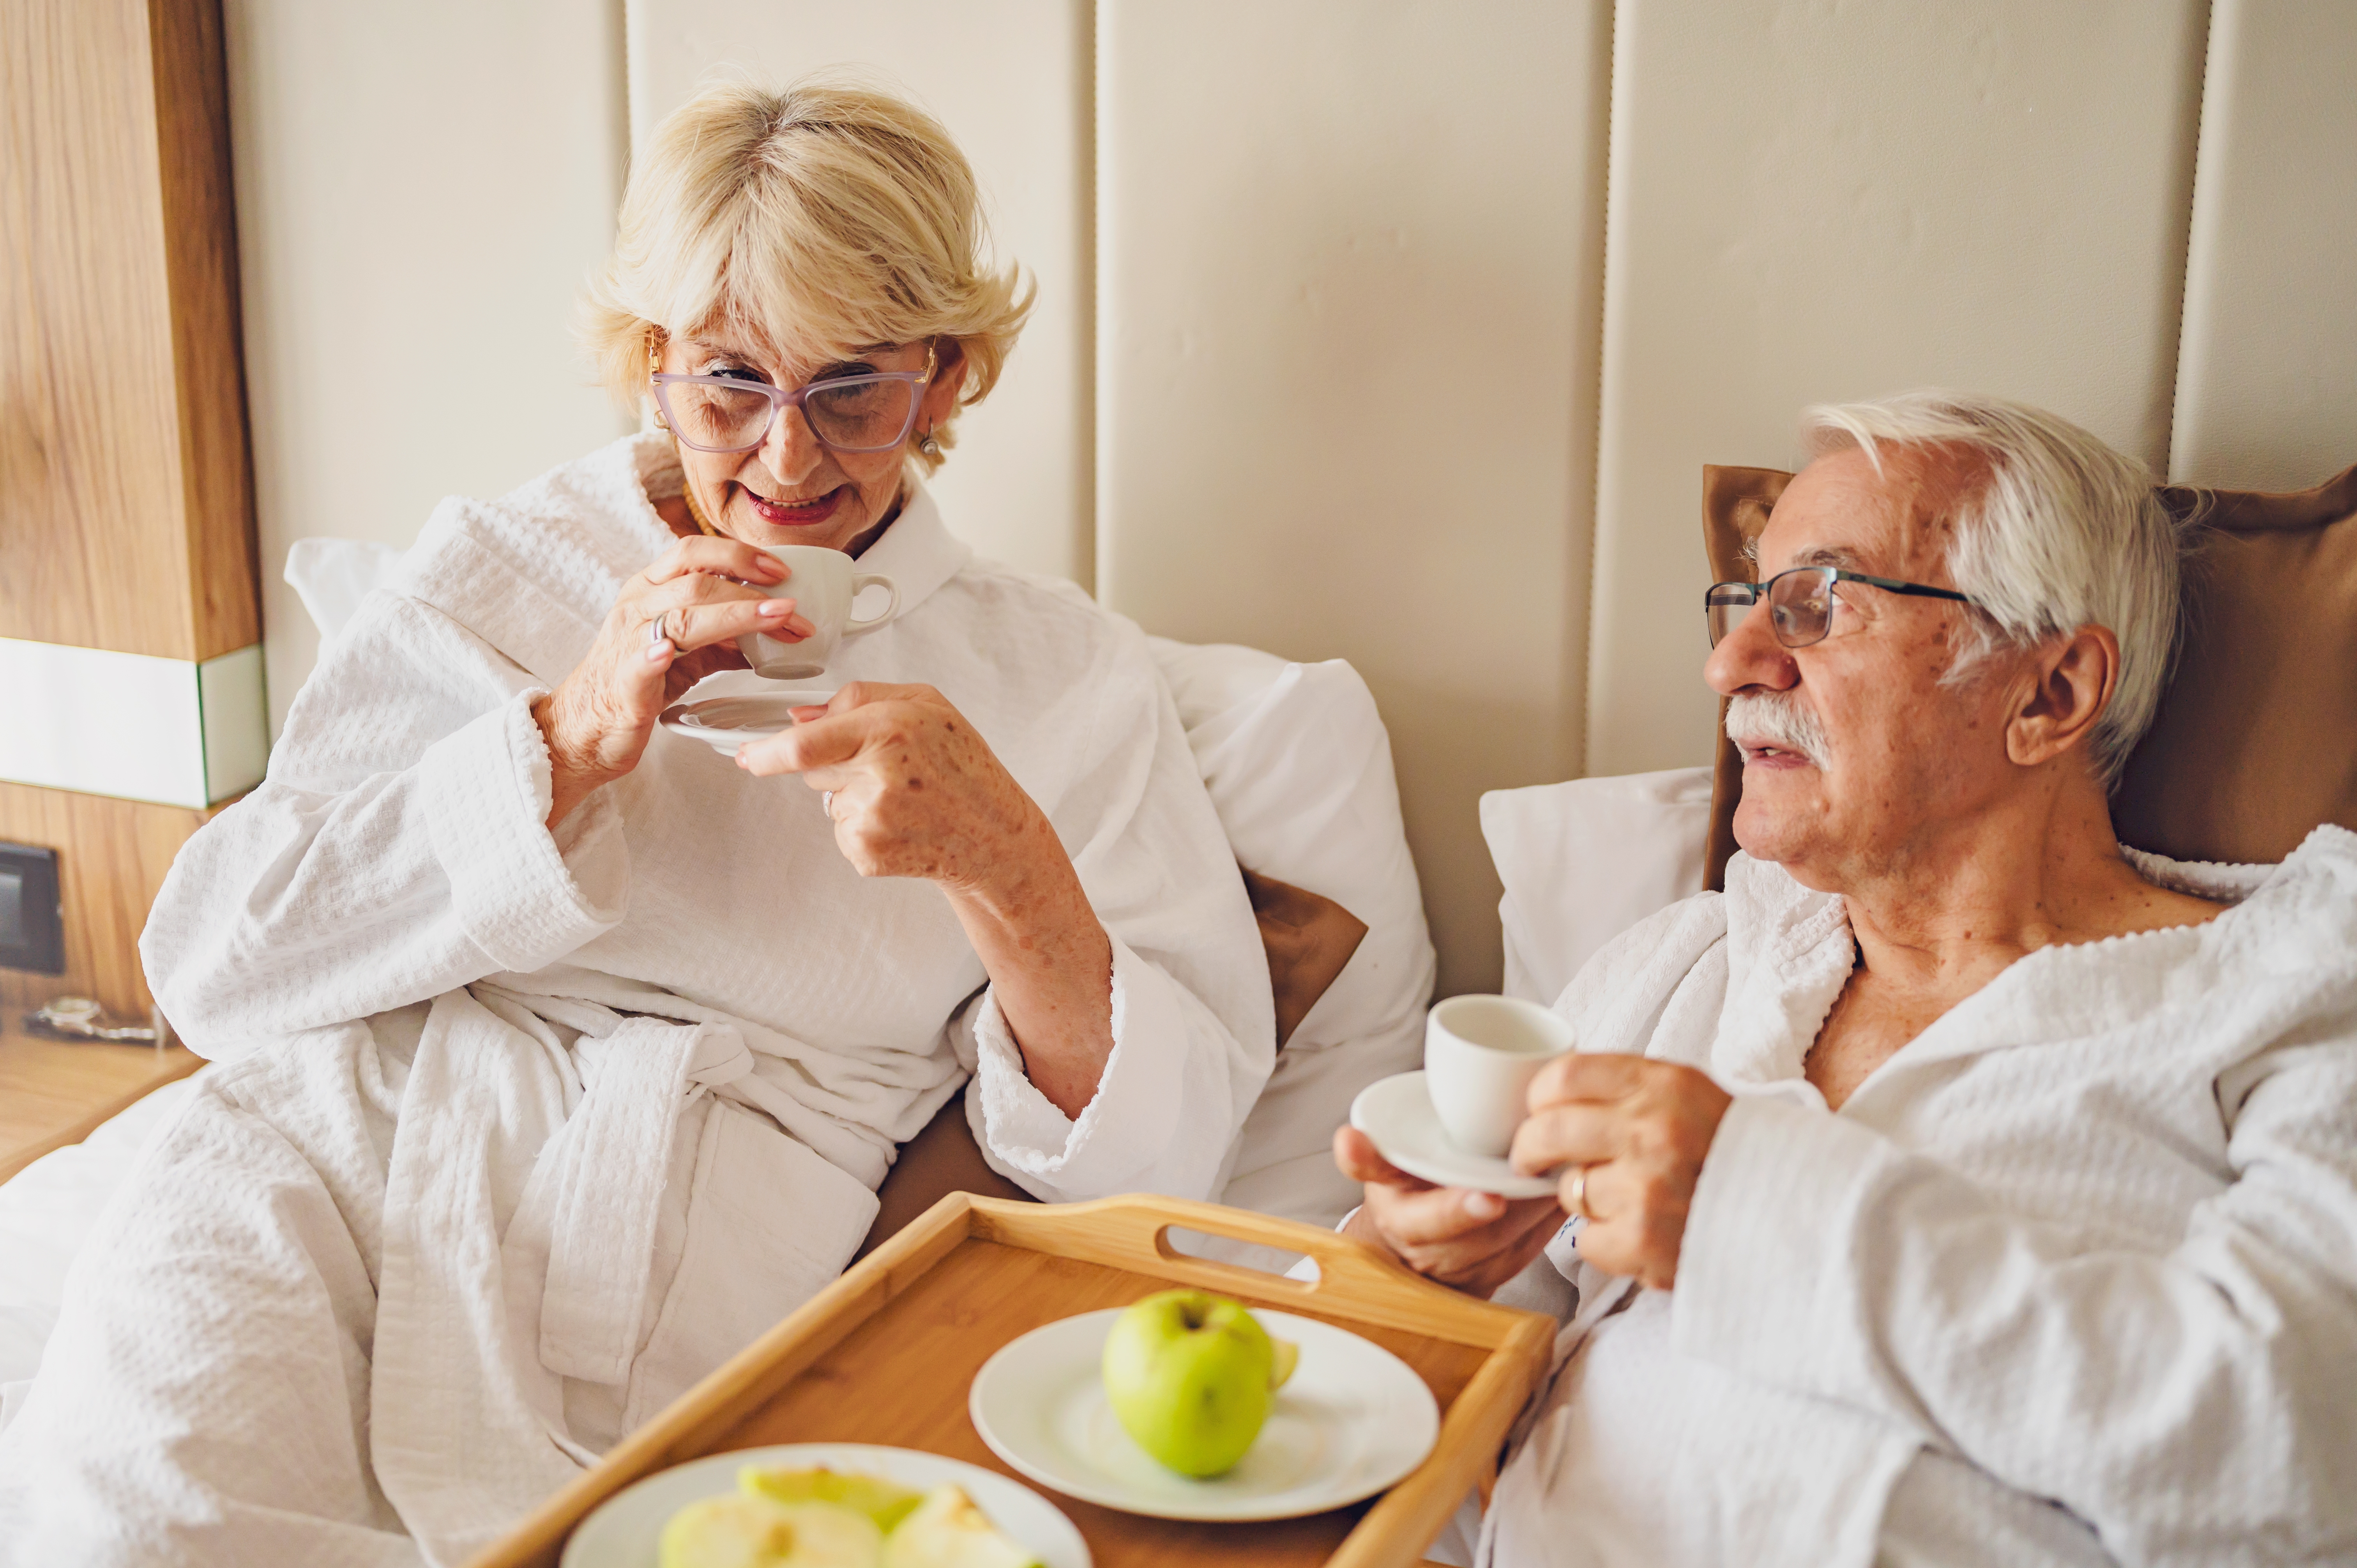 An elderly man and woman in a hotel room | Source: Shutterstock